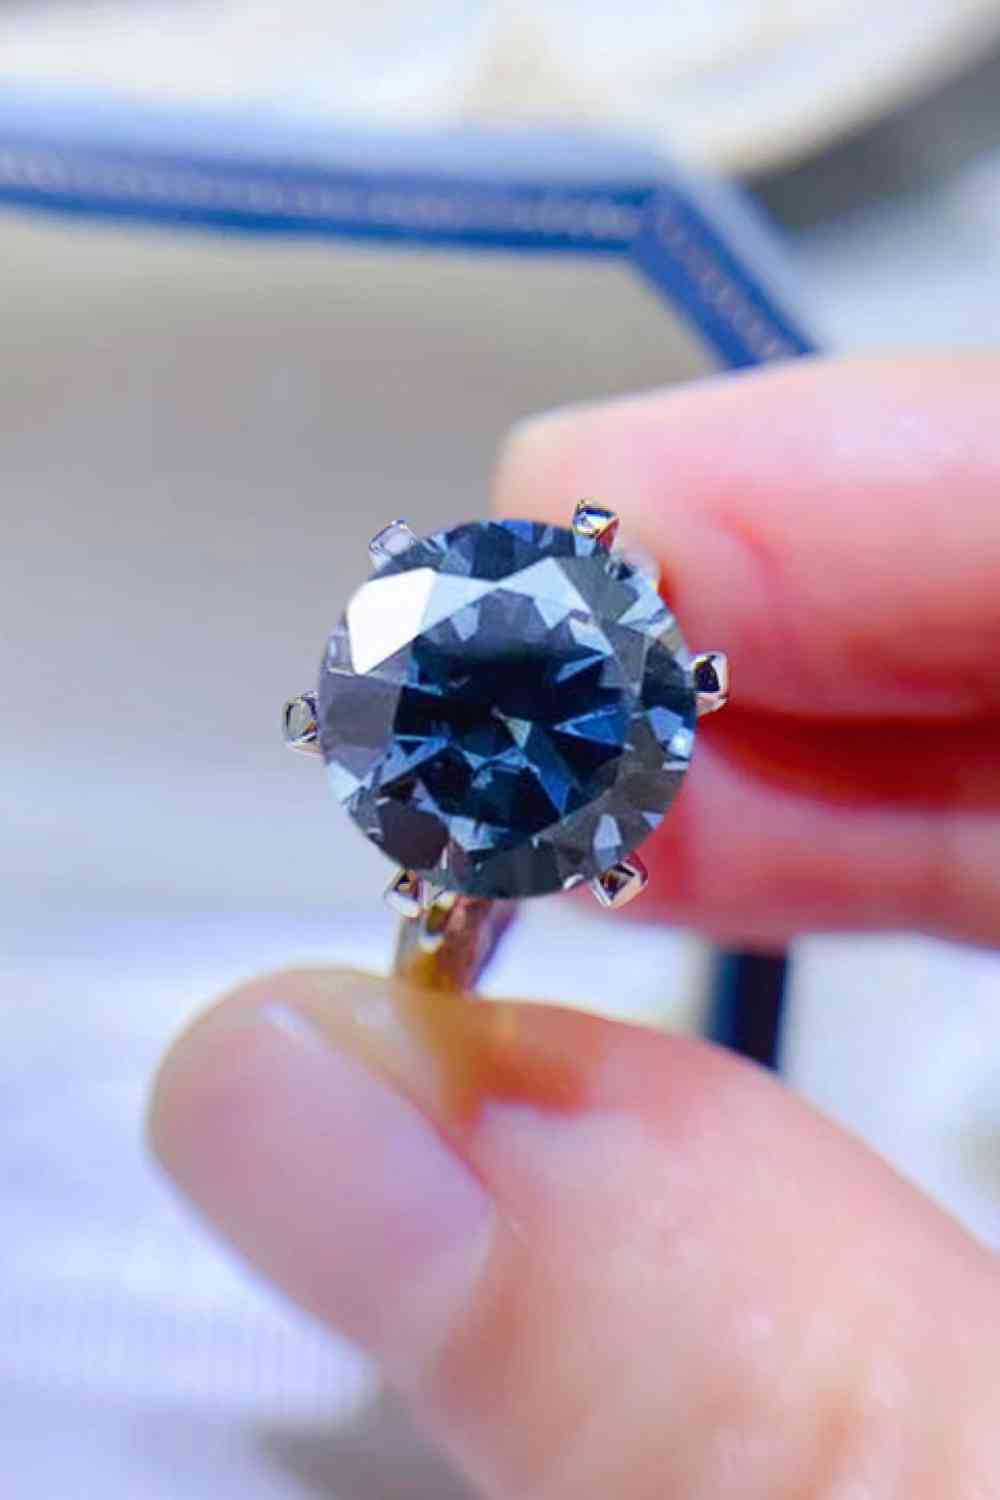 a person holding a blue diamond in their hand